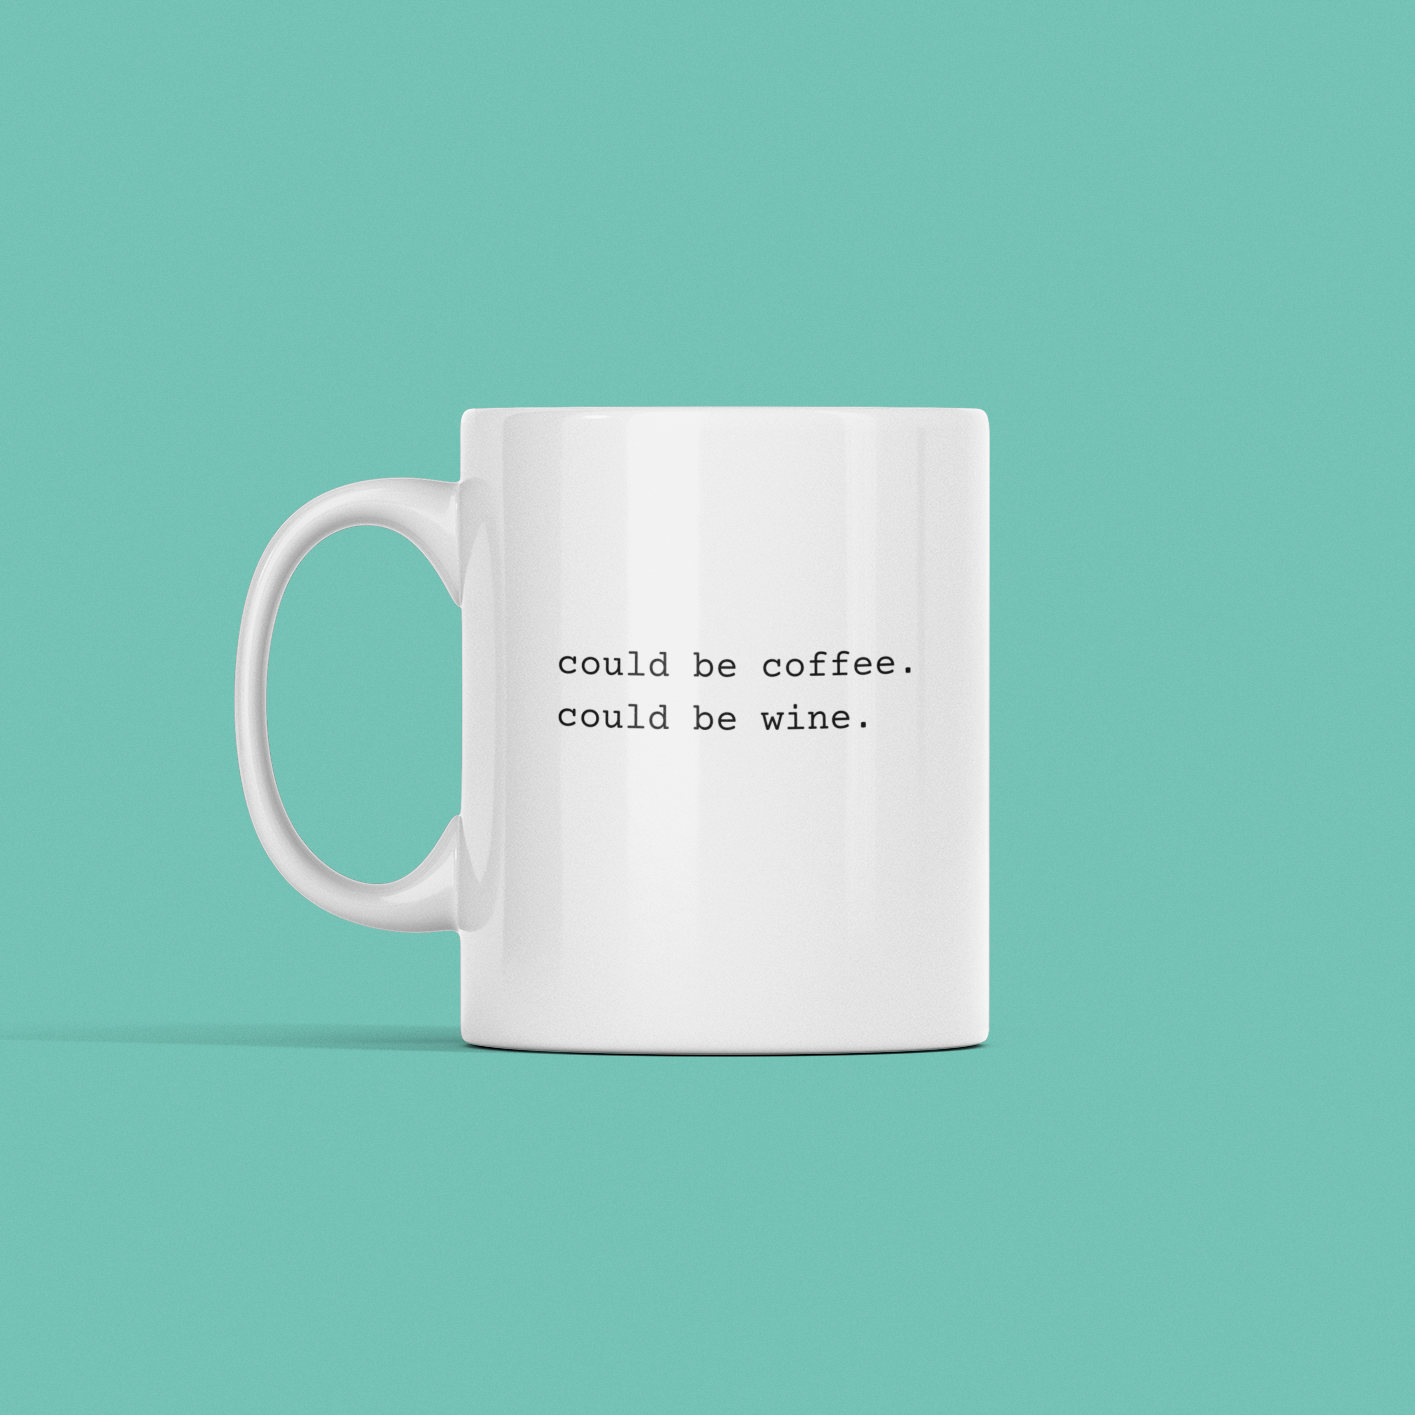 funny coffee mug that says could be coffee could be wine